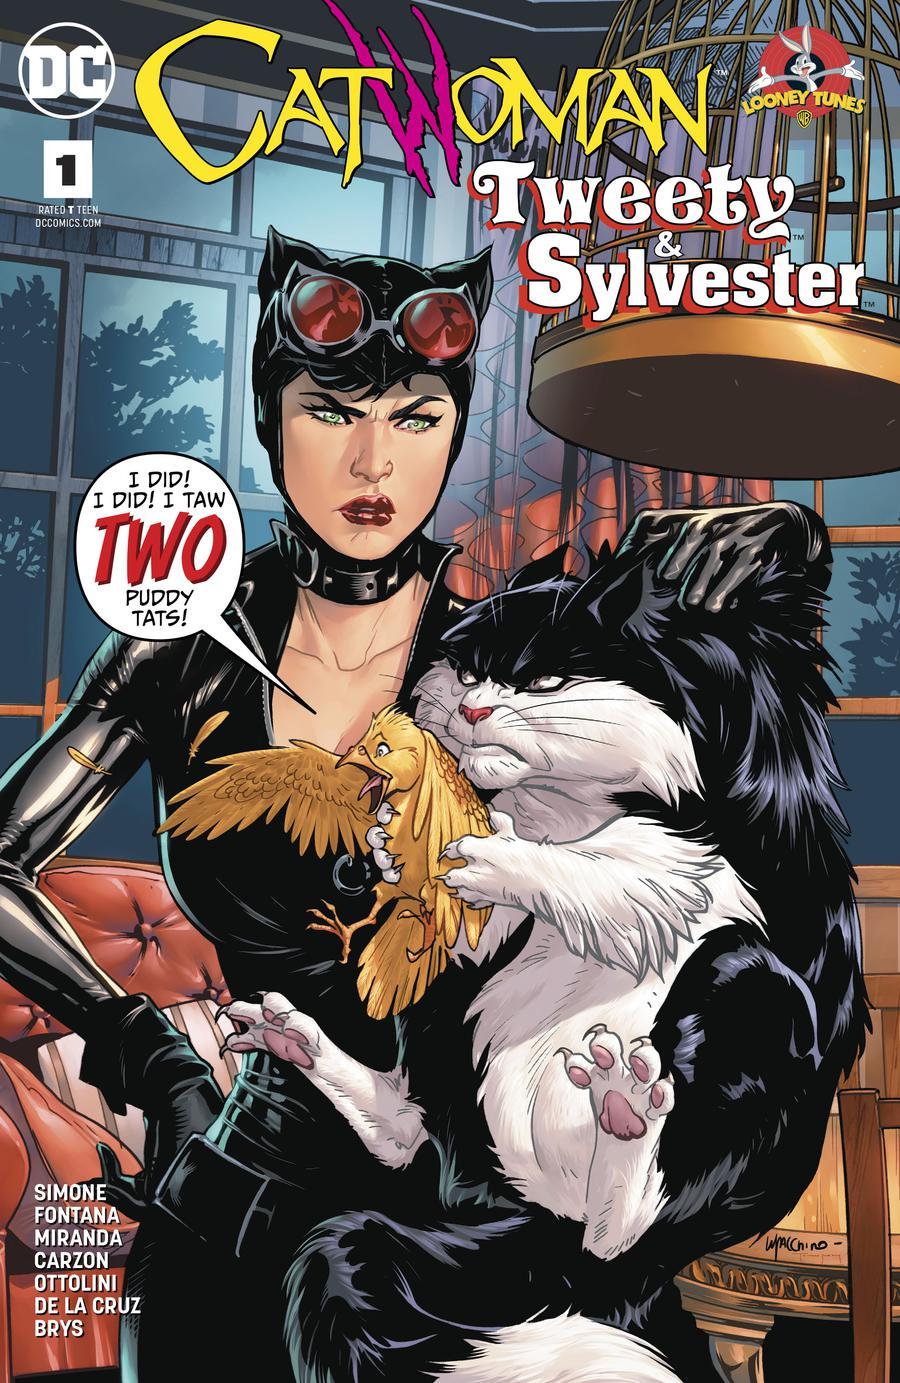 Catwoman Tweety & Sylvester Special Vol. 1 #1